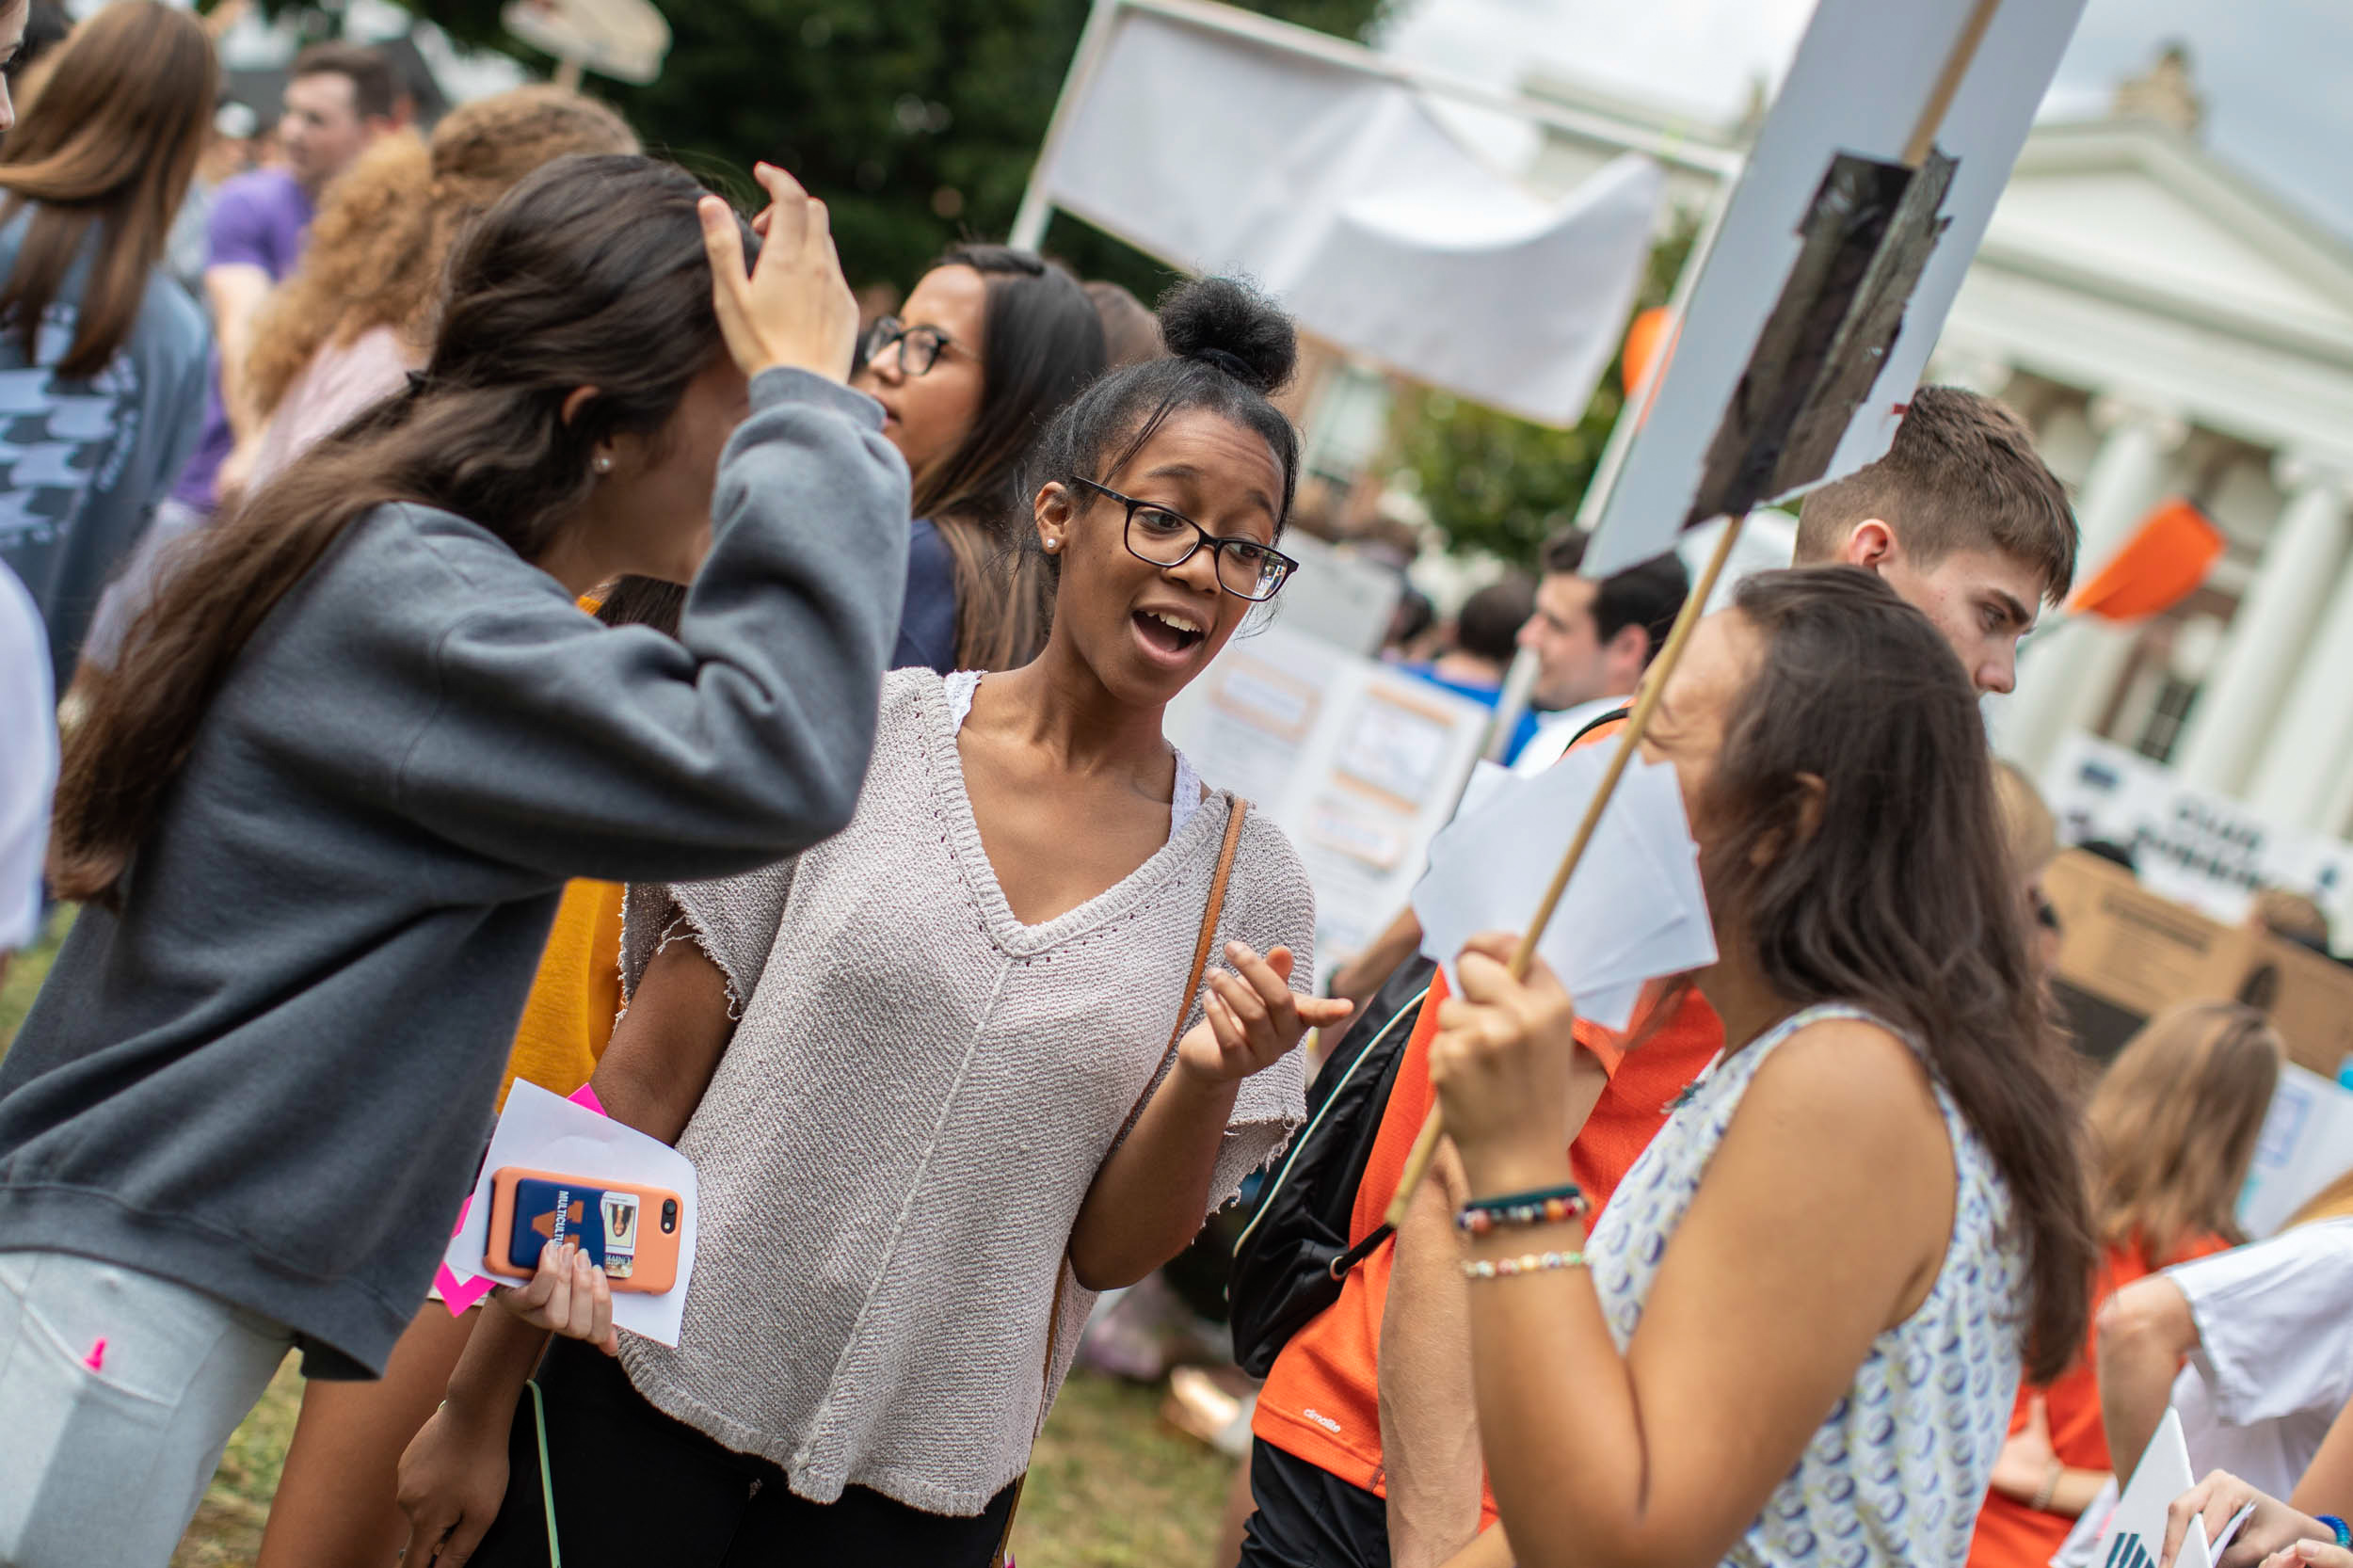 Students talking at the activities fair on the Lawn